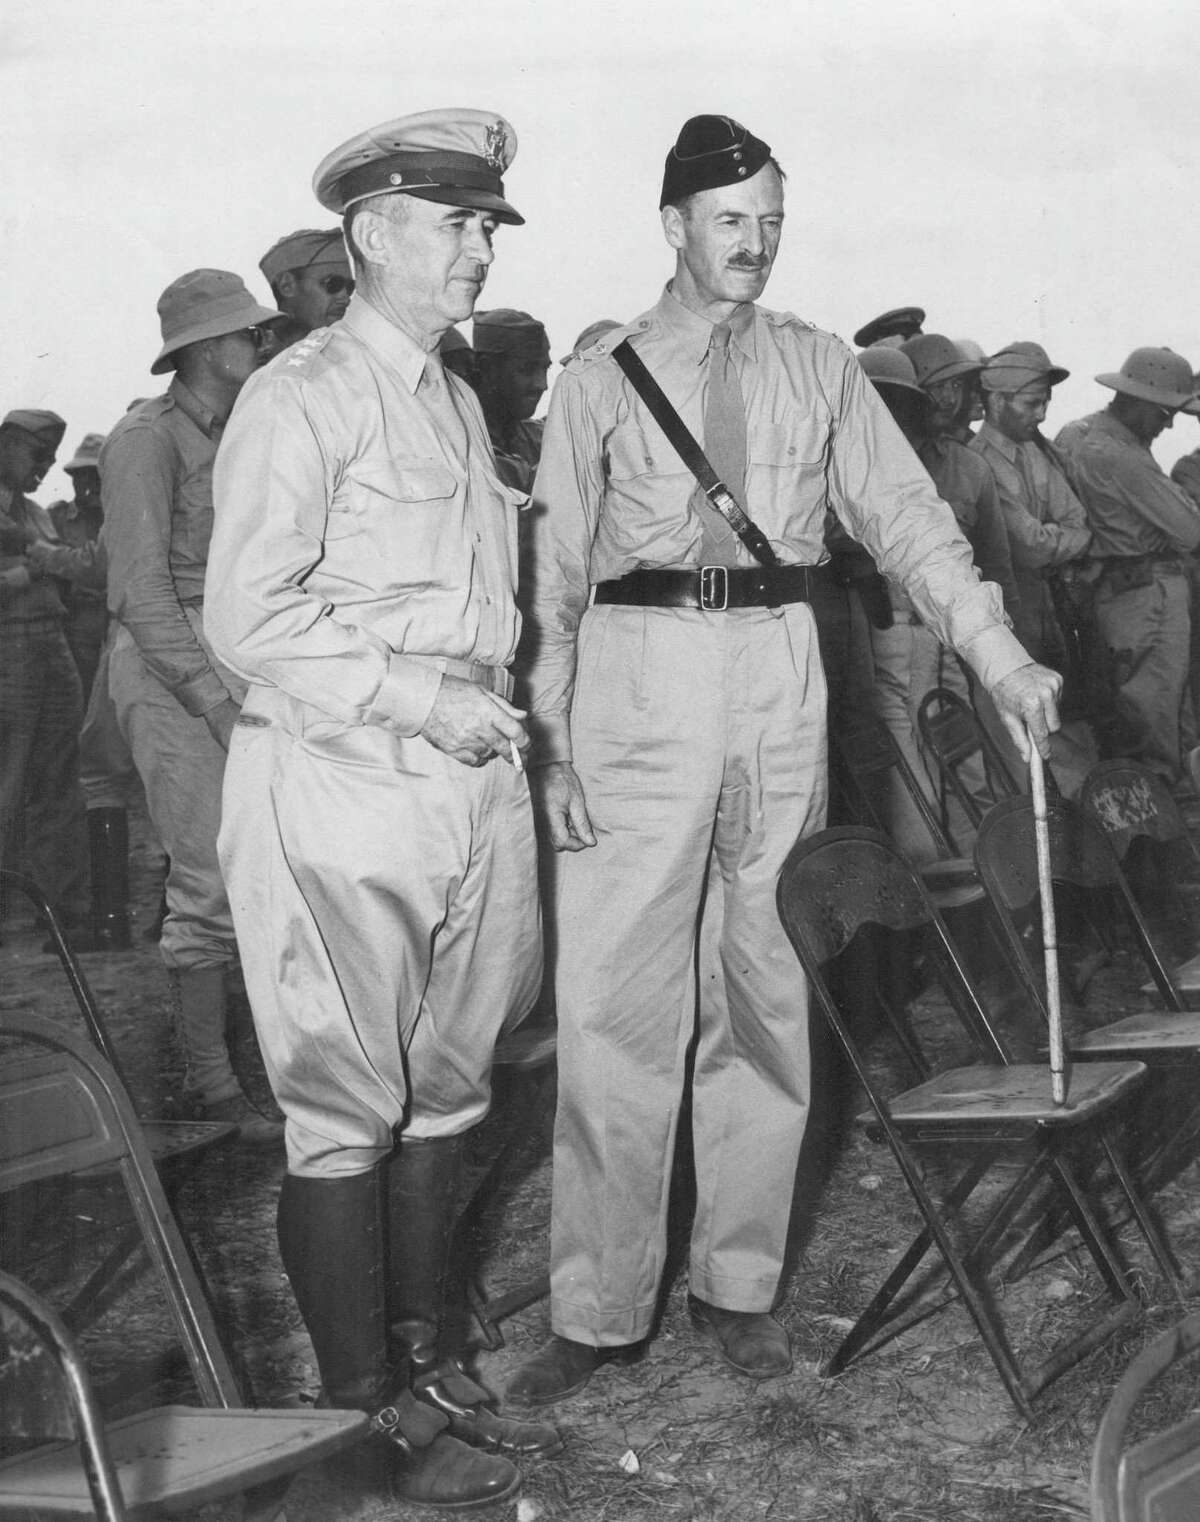 Witnessing a field exercise in the 1940s by the 2nd Infantry Division at Camp Bullis are Lt. Gen. Walter Krueger, commanding general of the Third Army; and Maj. Gen. Richard Henry Dewing of the British Military Staff in Washington, D.C. The exercise included a tank-led demonstration of an attack upon a strongly-held defensive position.